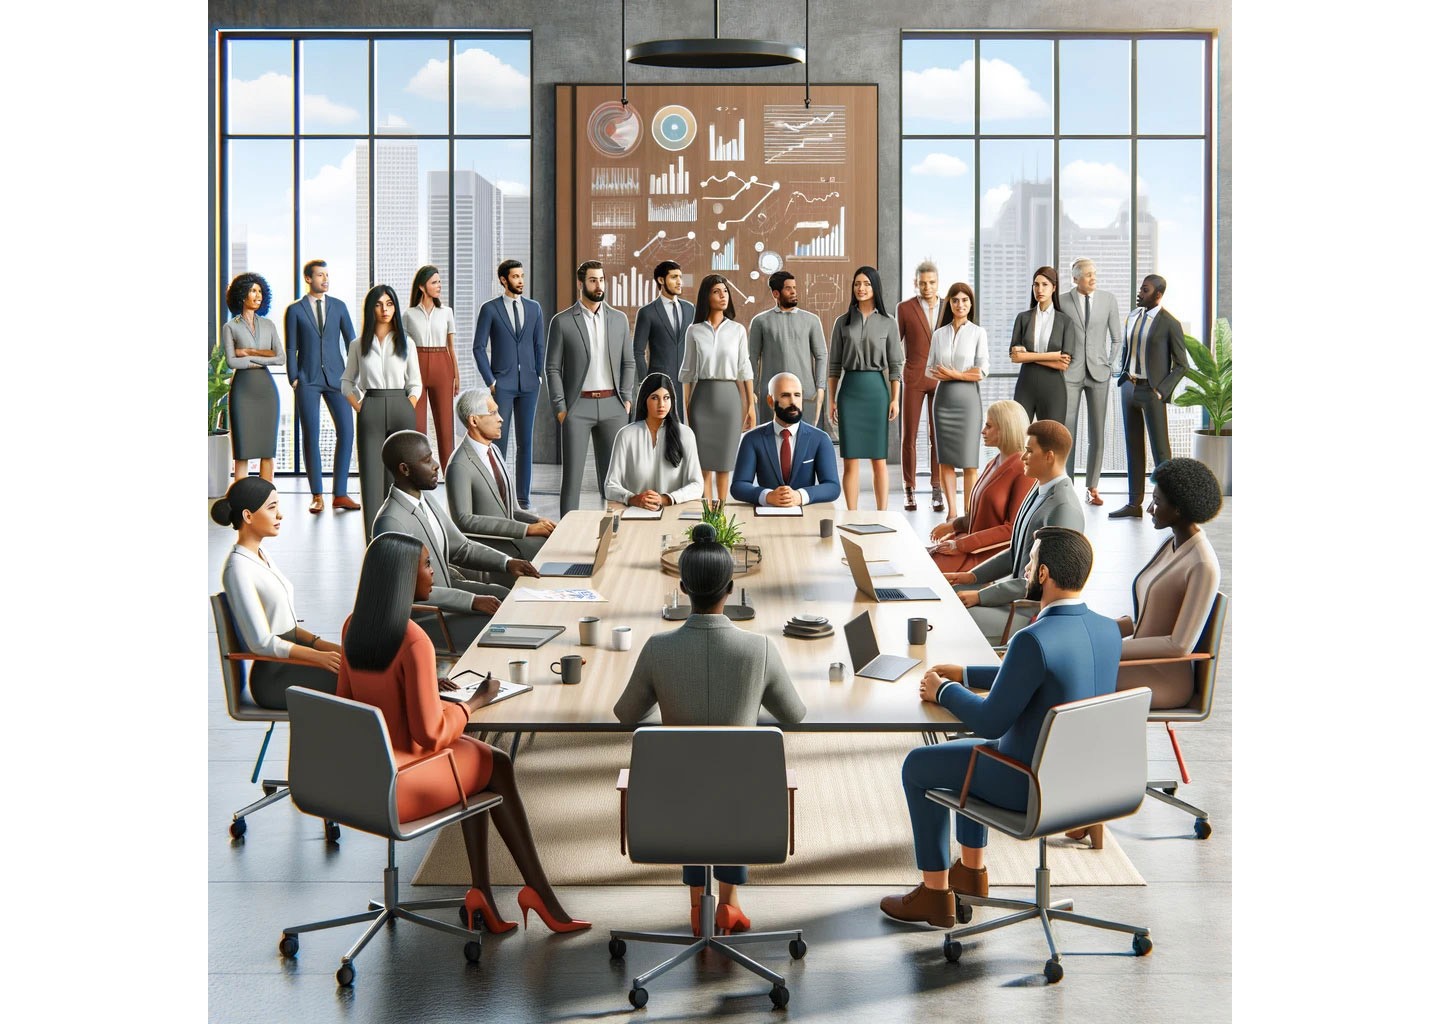 Several men and women leaders of different ethnicities sitting around a table and standing in a large, windowed office space engaging in a collaborative discussion.